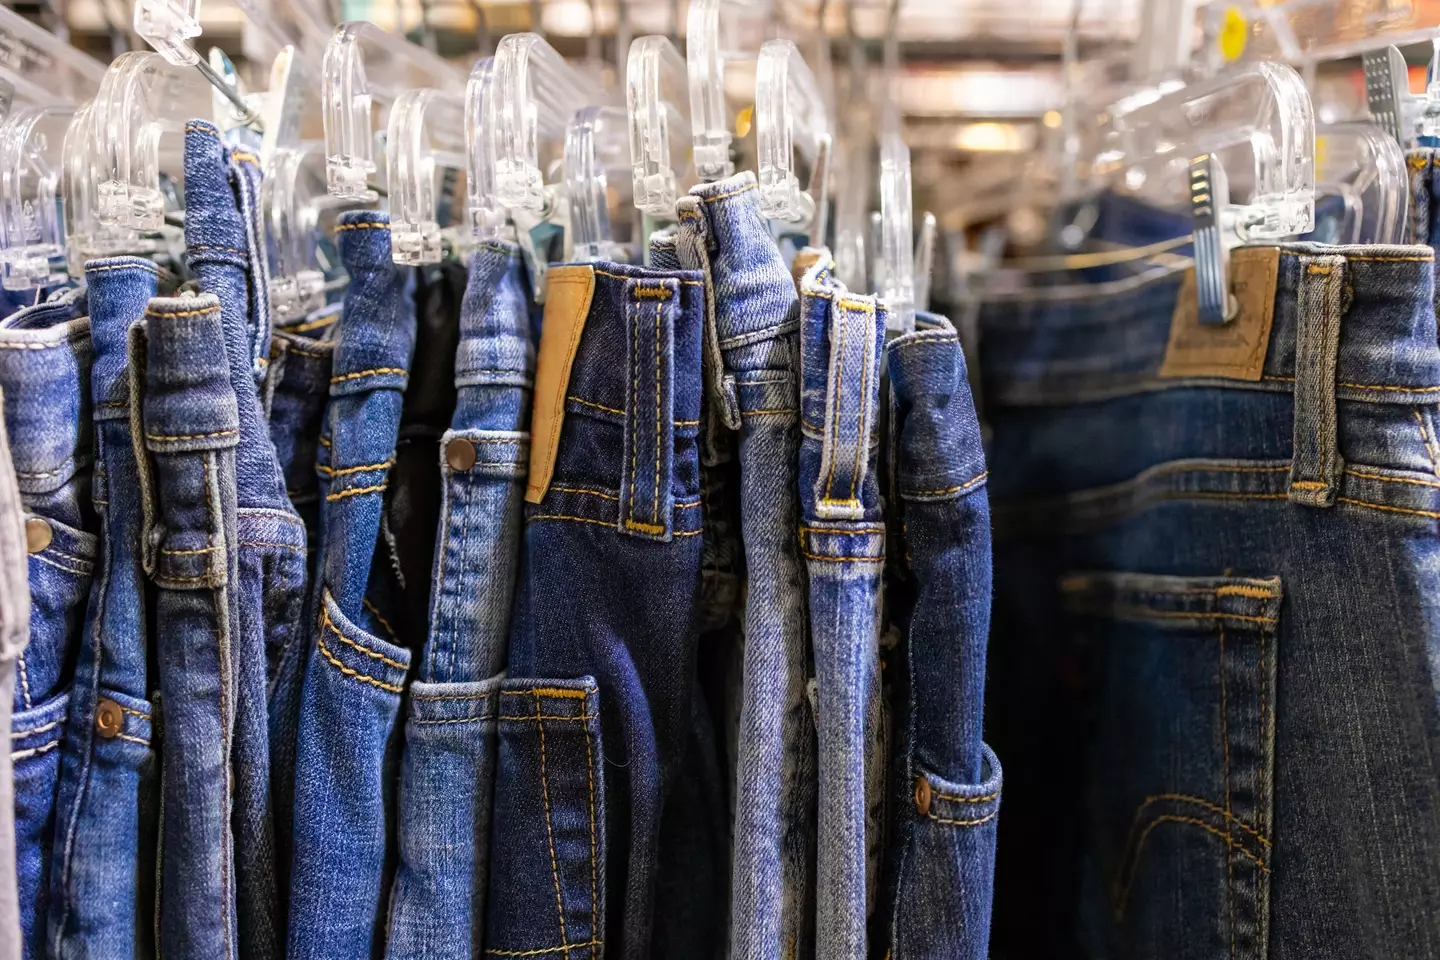 The study is certainly something to consider before you buy your next pair of jeans.